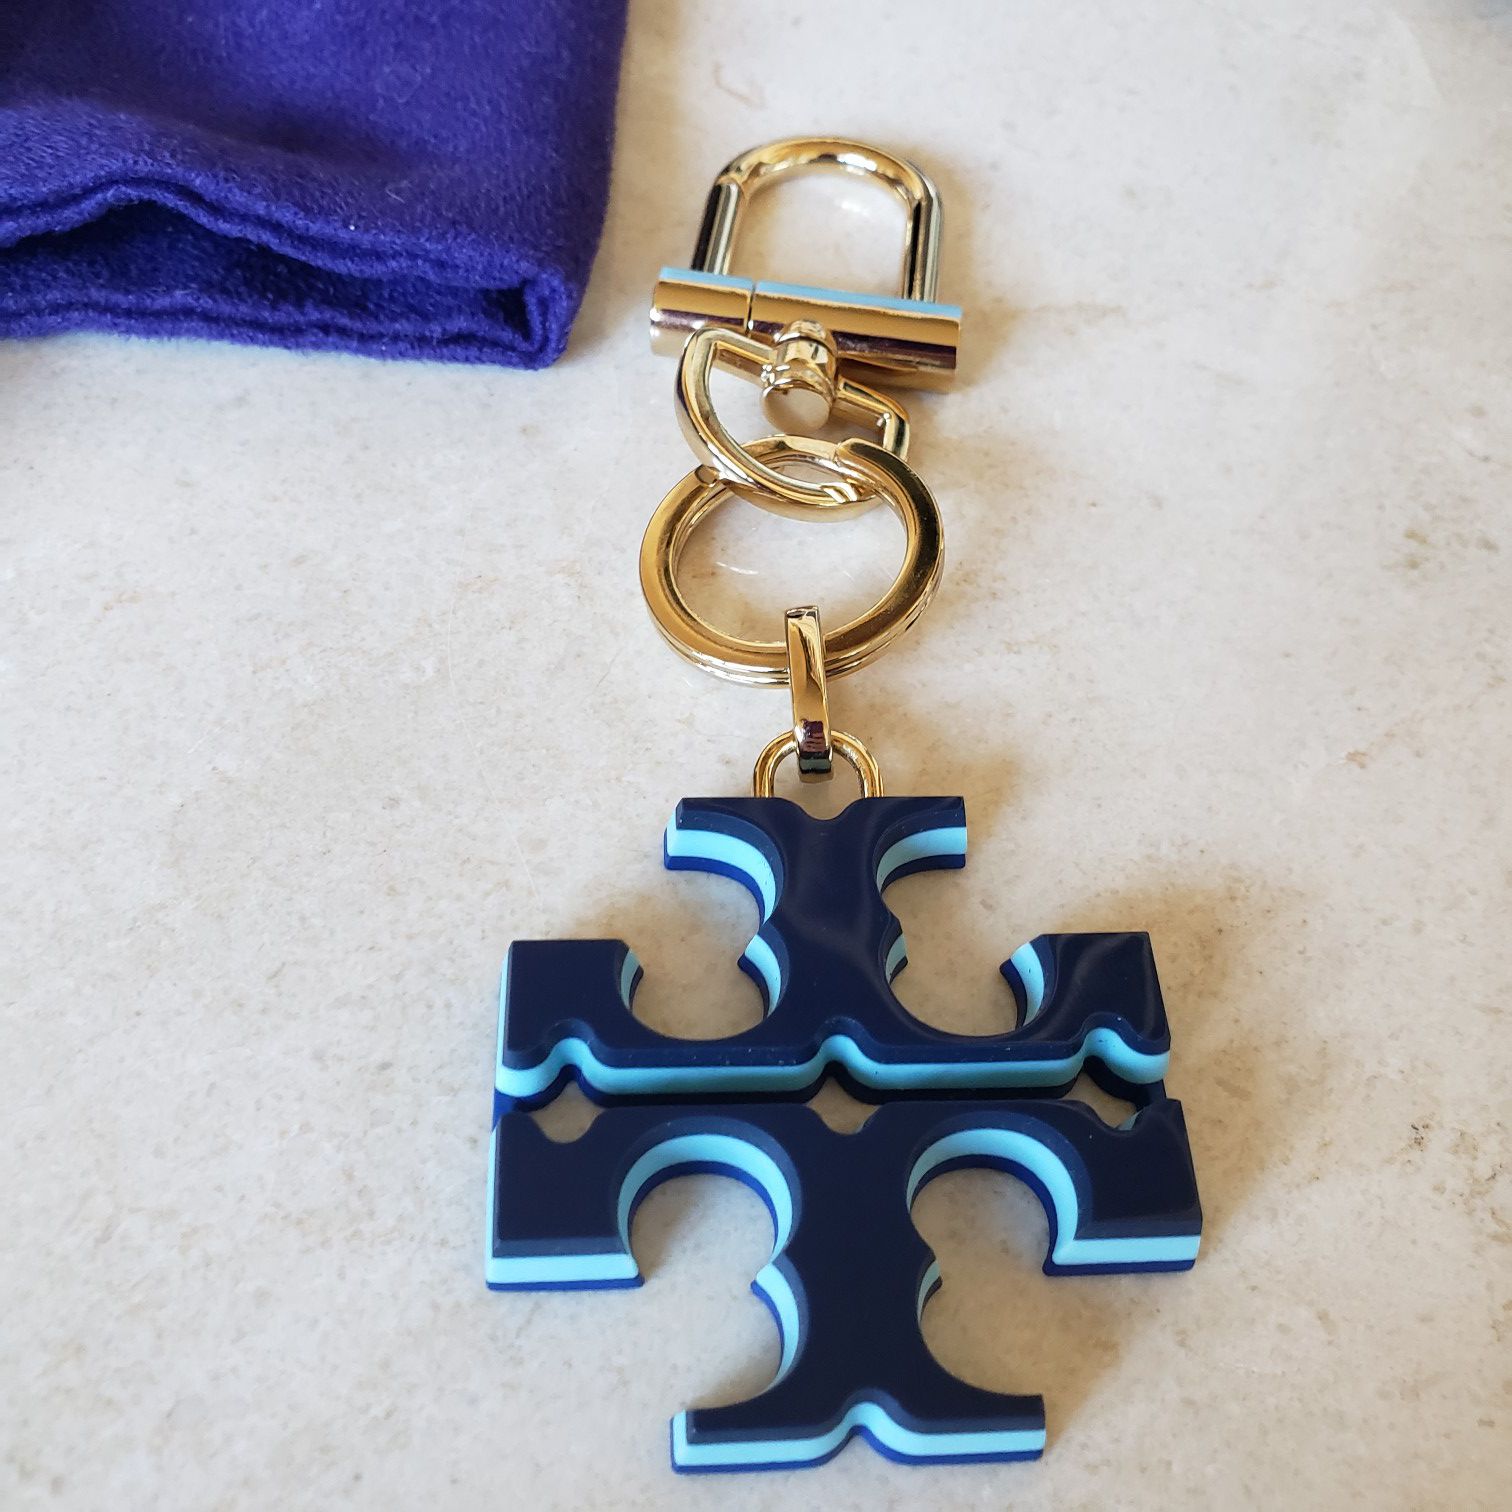 NWOT TORY BURCH TRI COLOR BLUE STACKED T BAG CHARM KEY RING GOLD HARDWARE